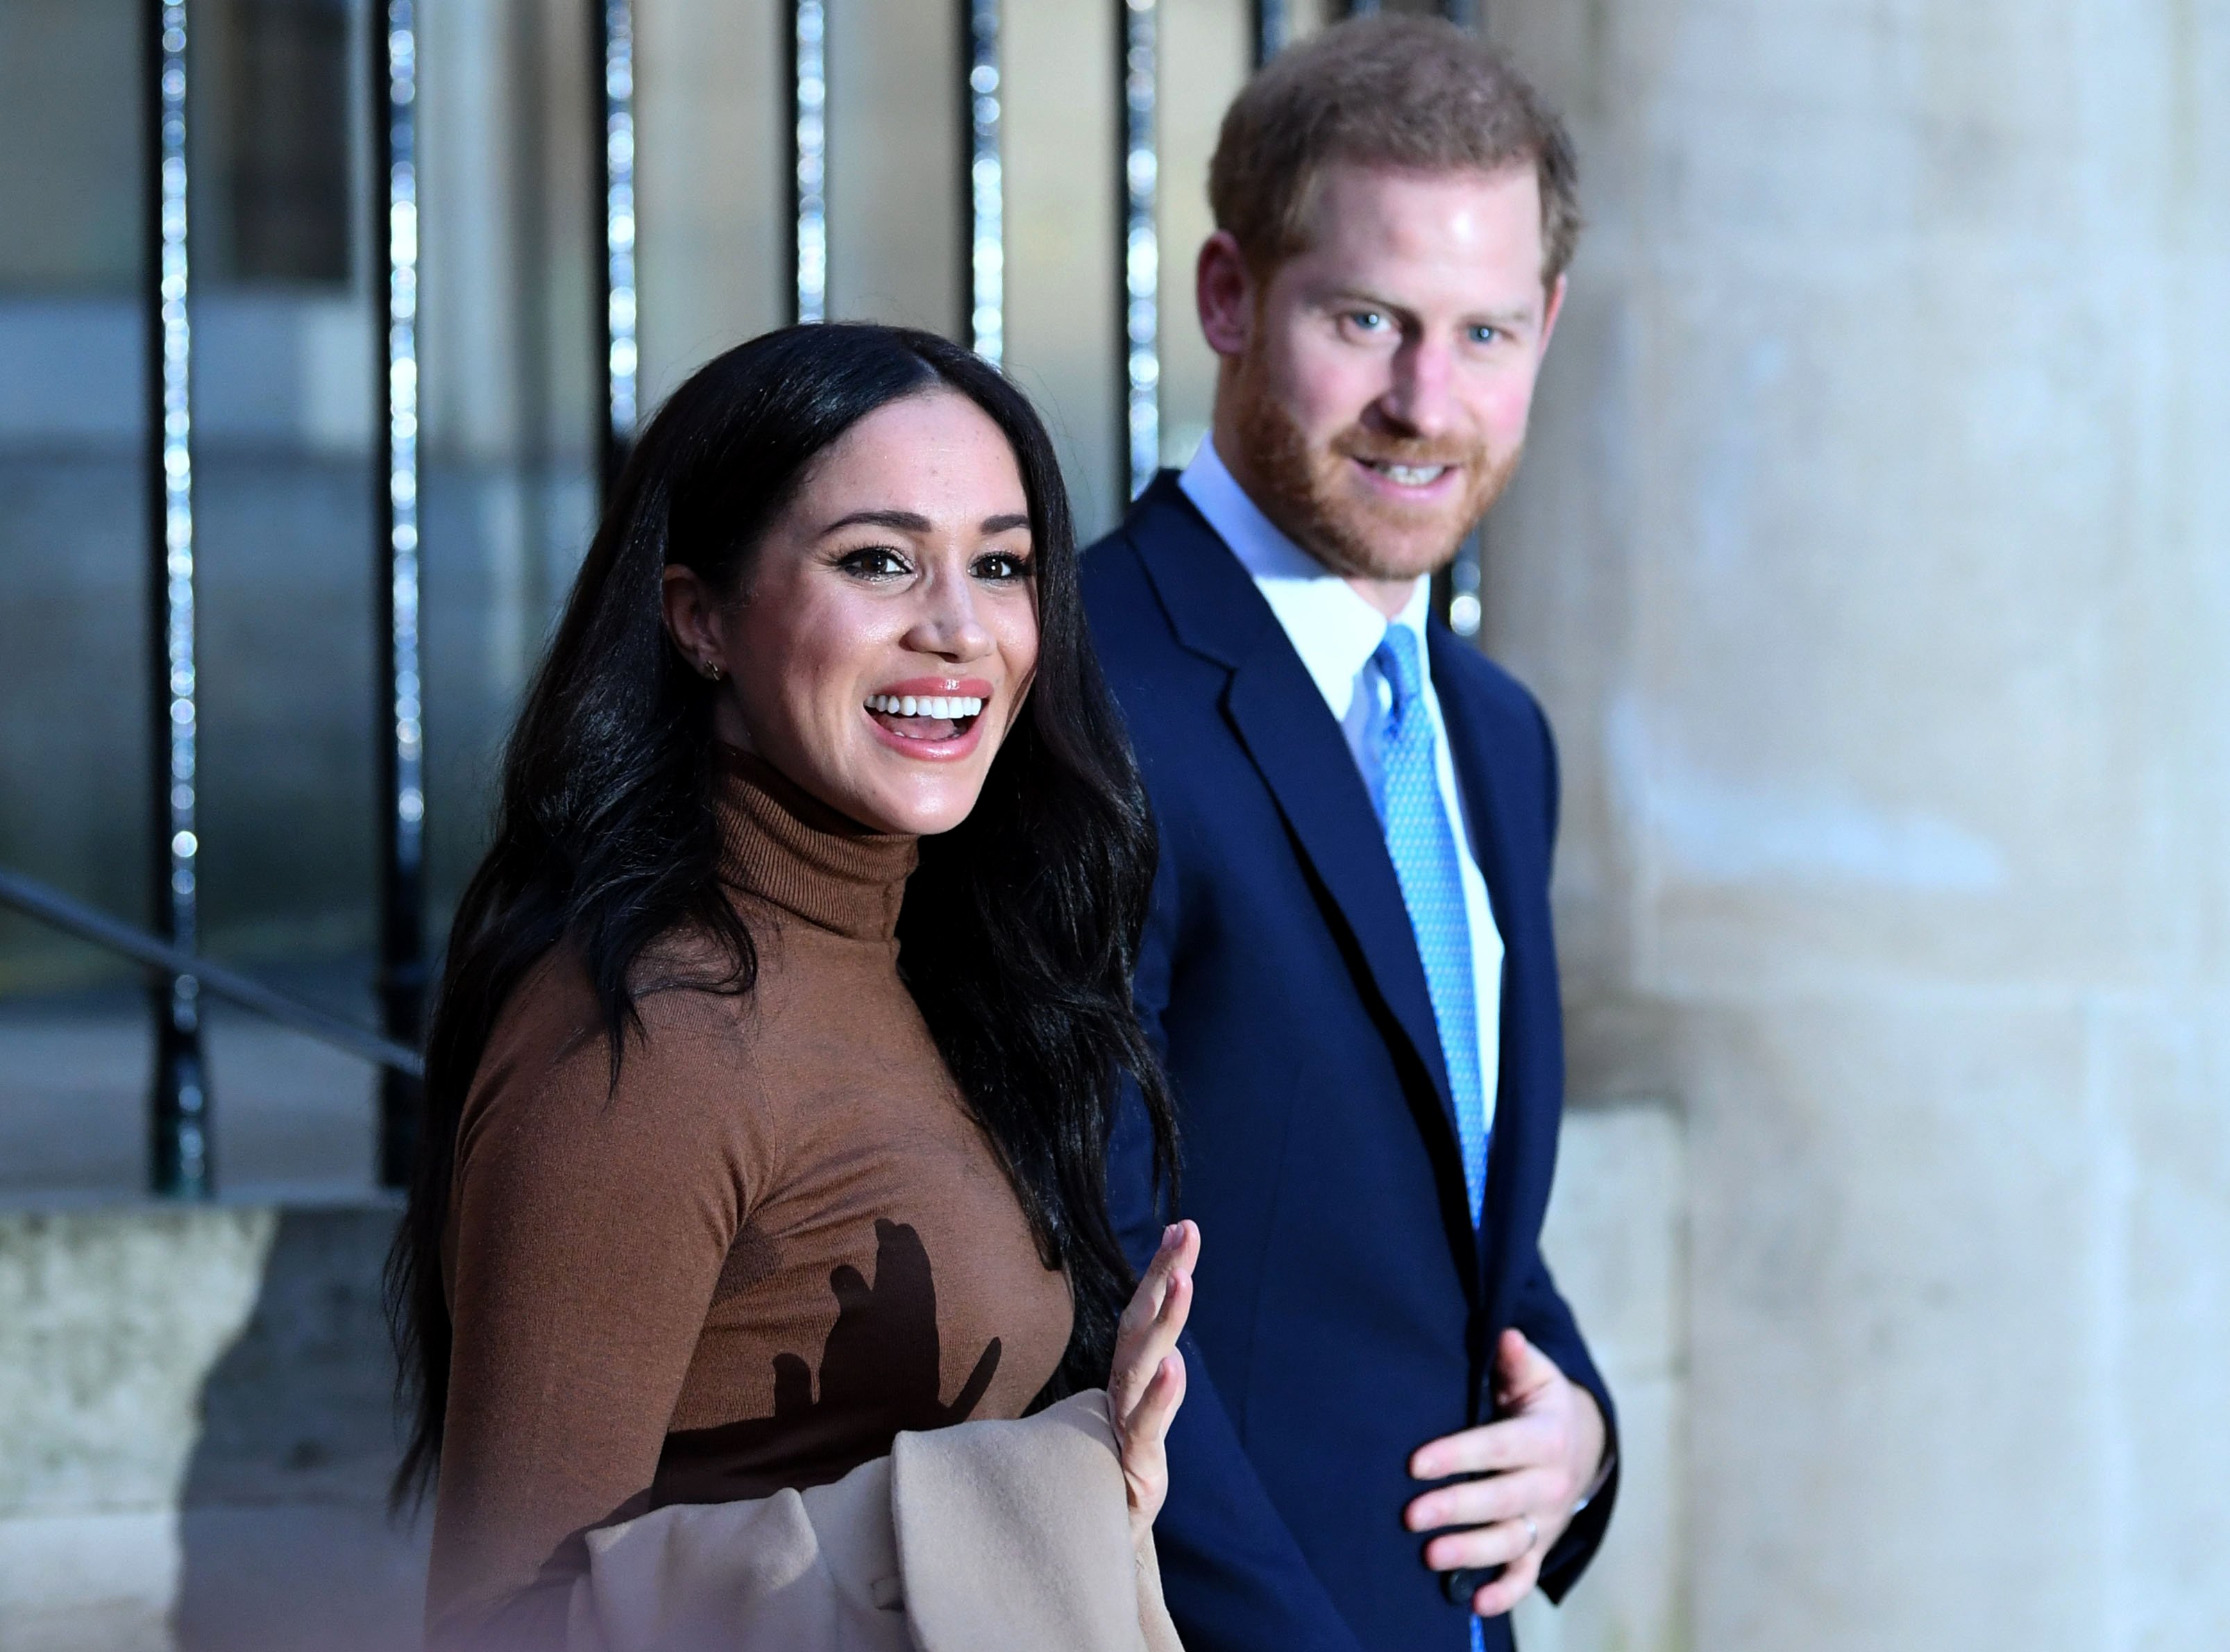 Prince Harry and Meghan Markle during their stay in Canada, on January 7, 2020 in London, England | Photo: Getty Images